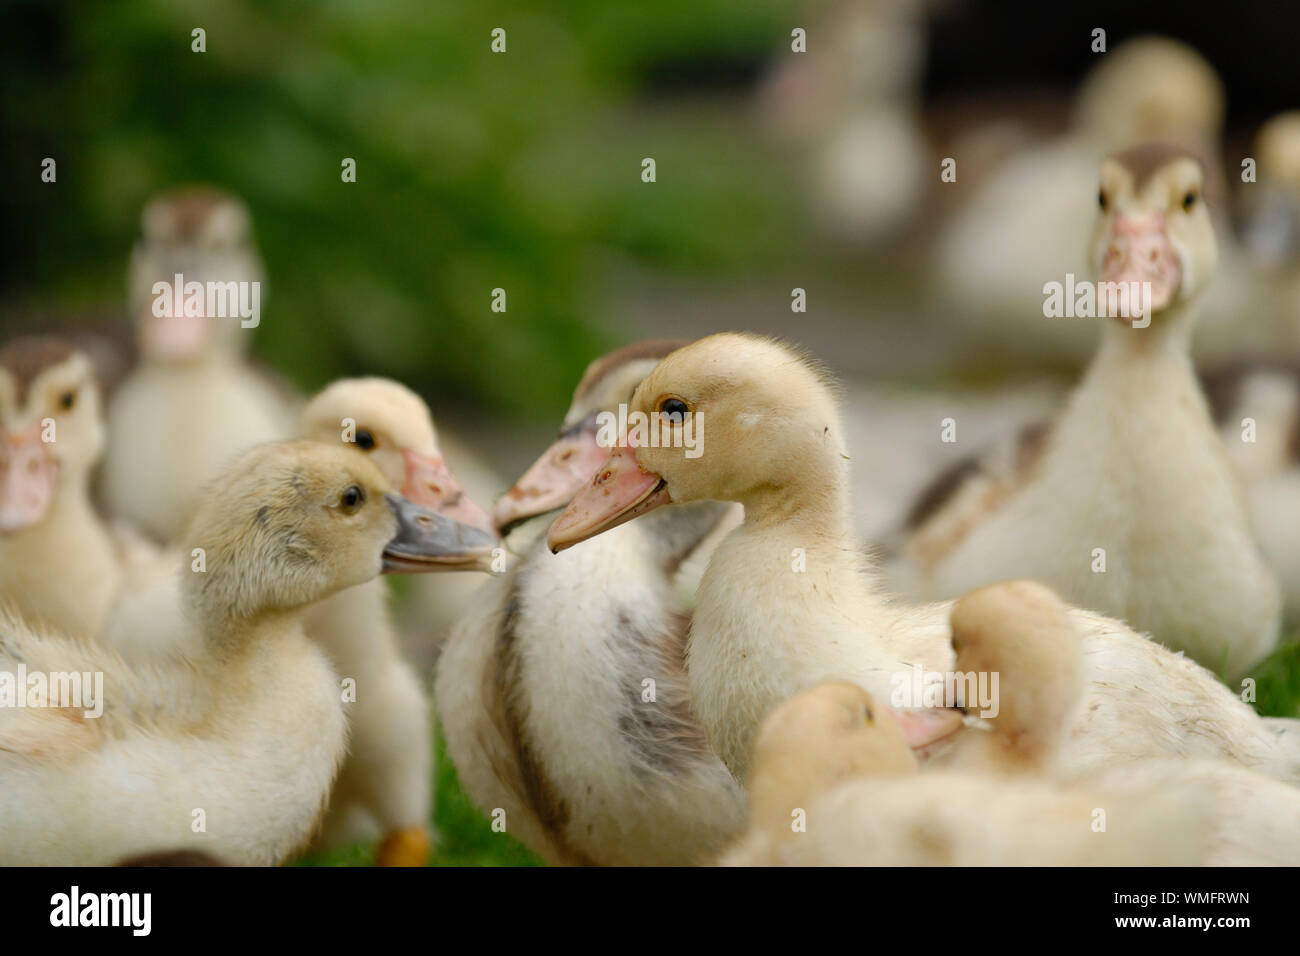 Domestic duck, Ducklings Stock Photo